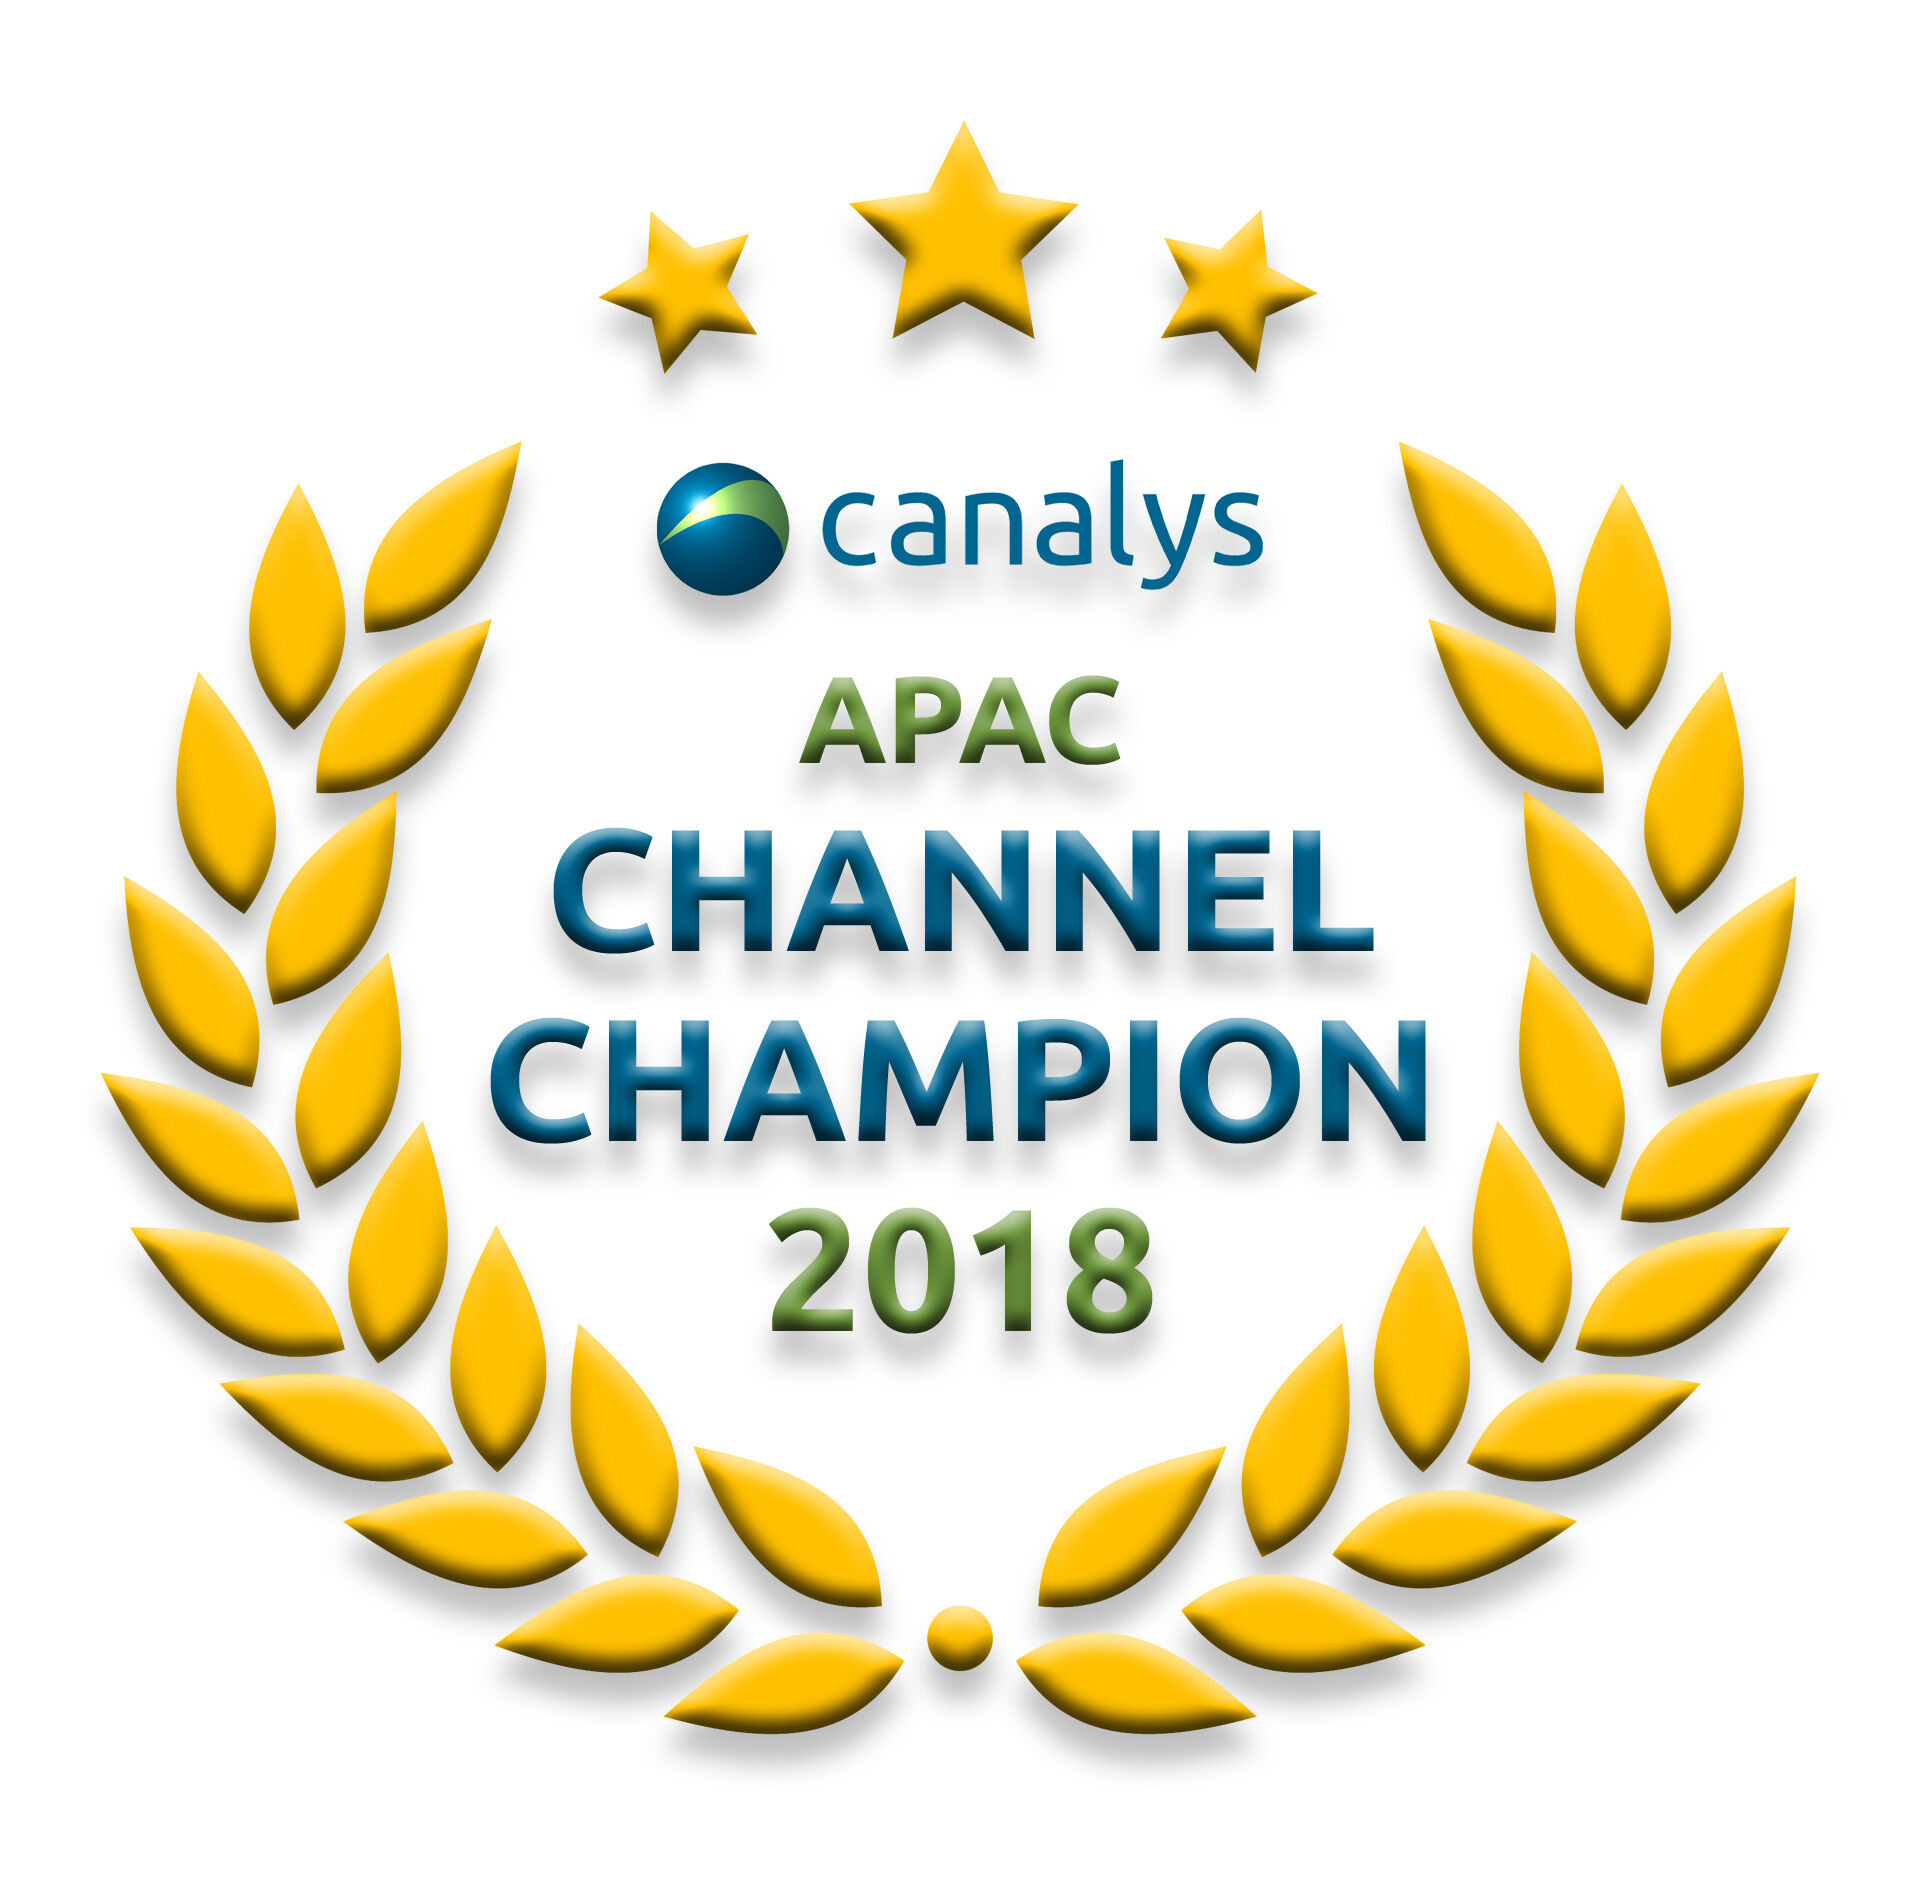 Veeam® came in at the top again in the Champions category in the Canalys Leadership Matrix!